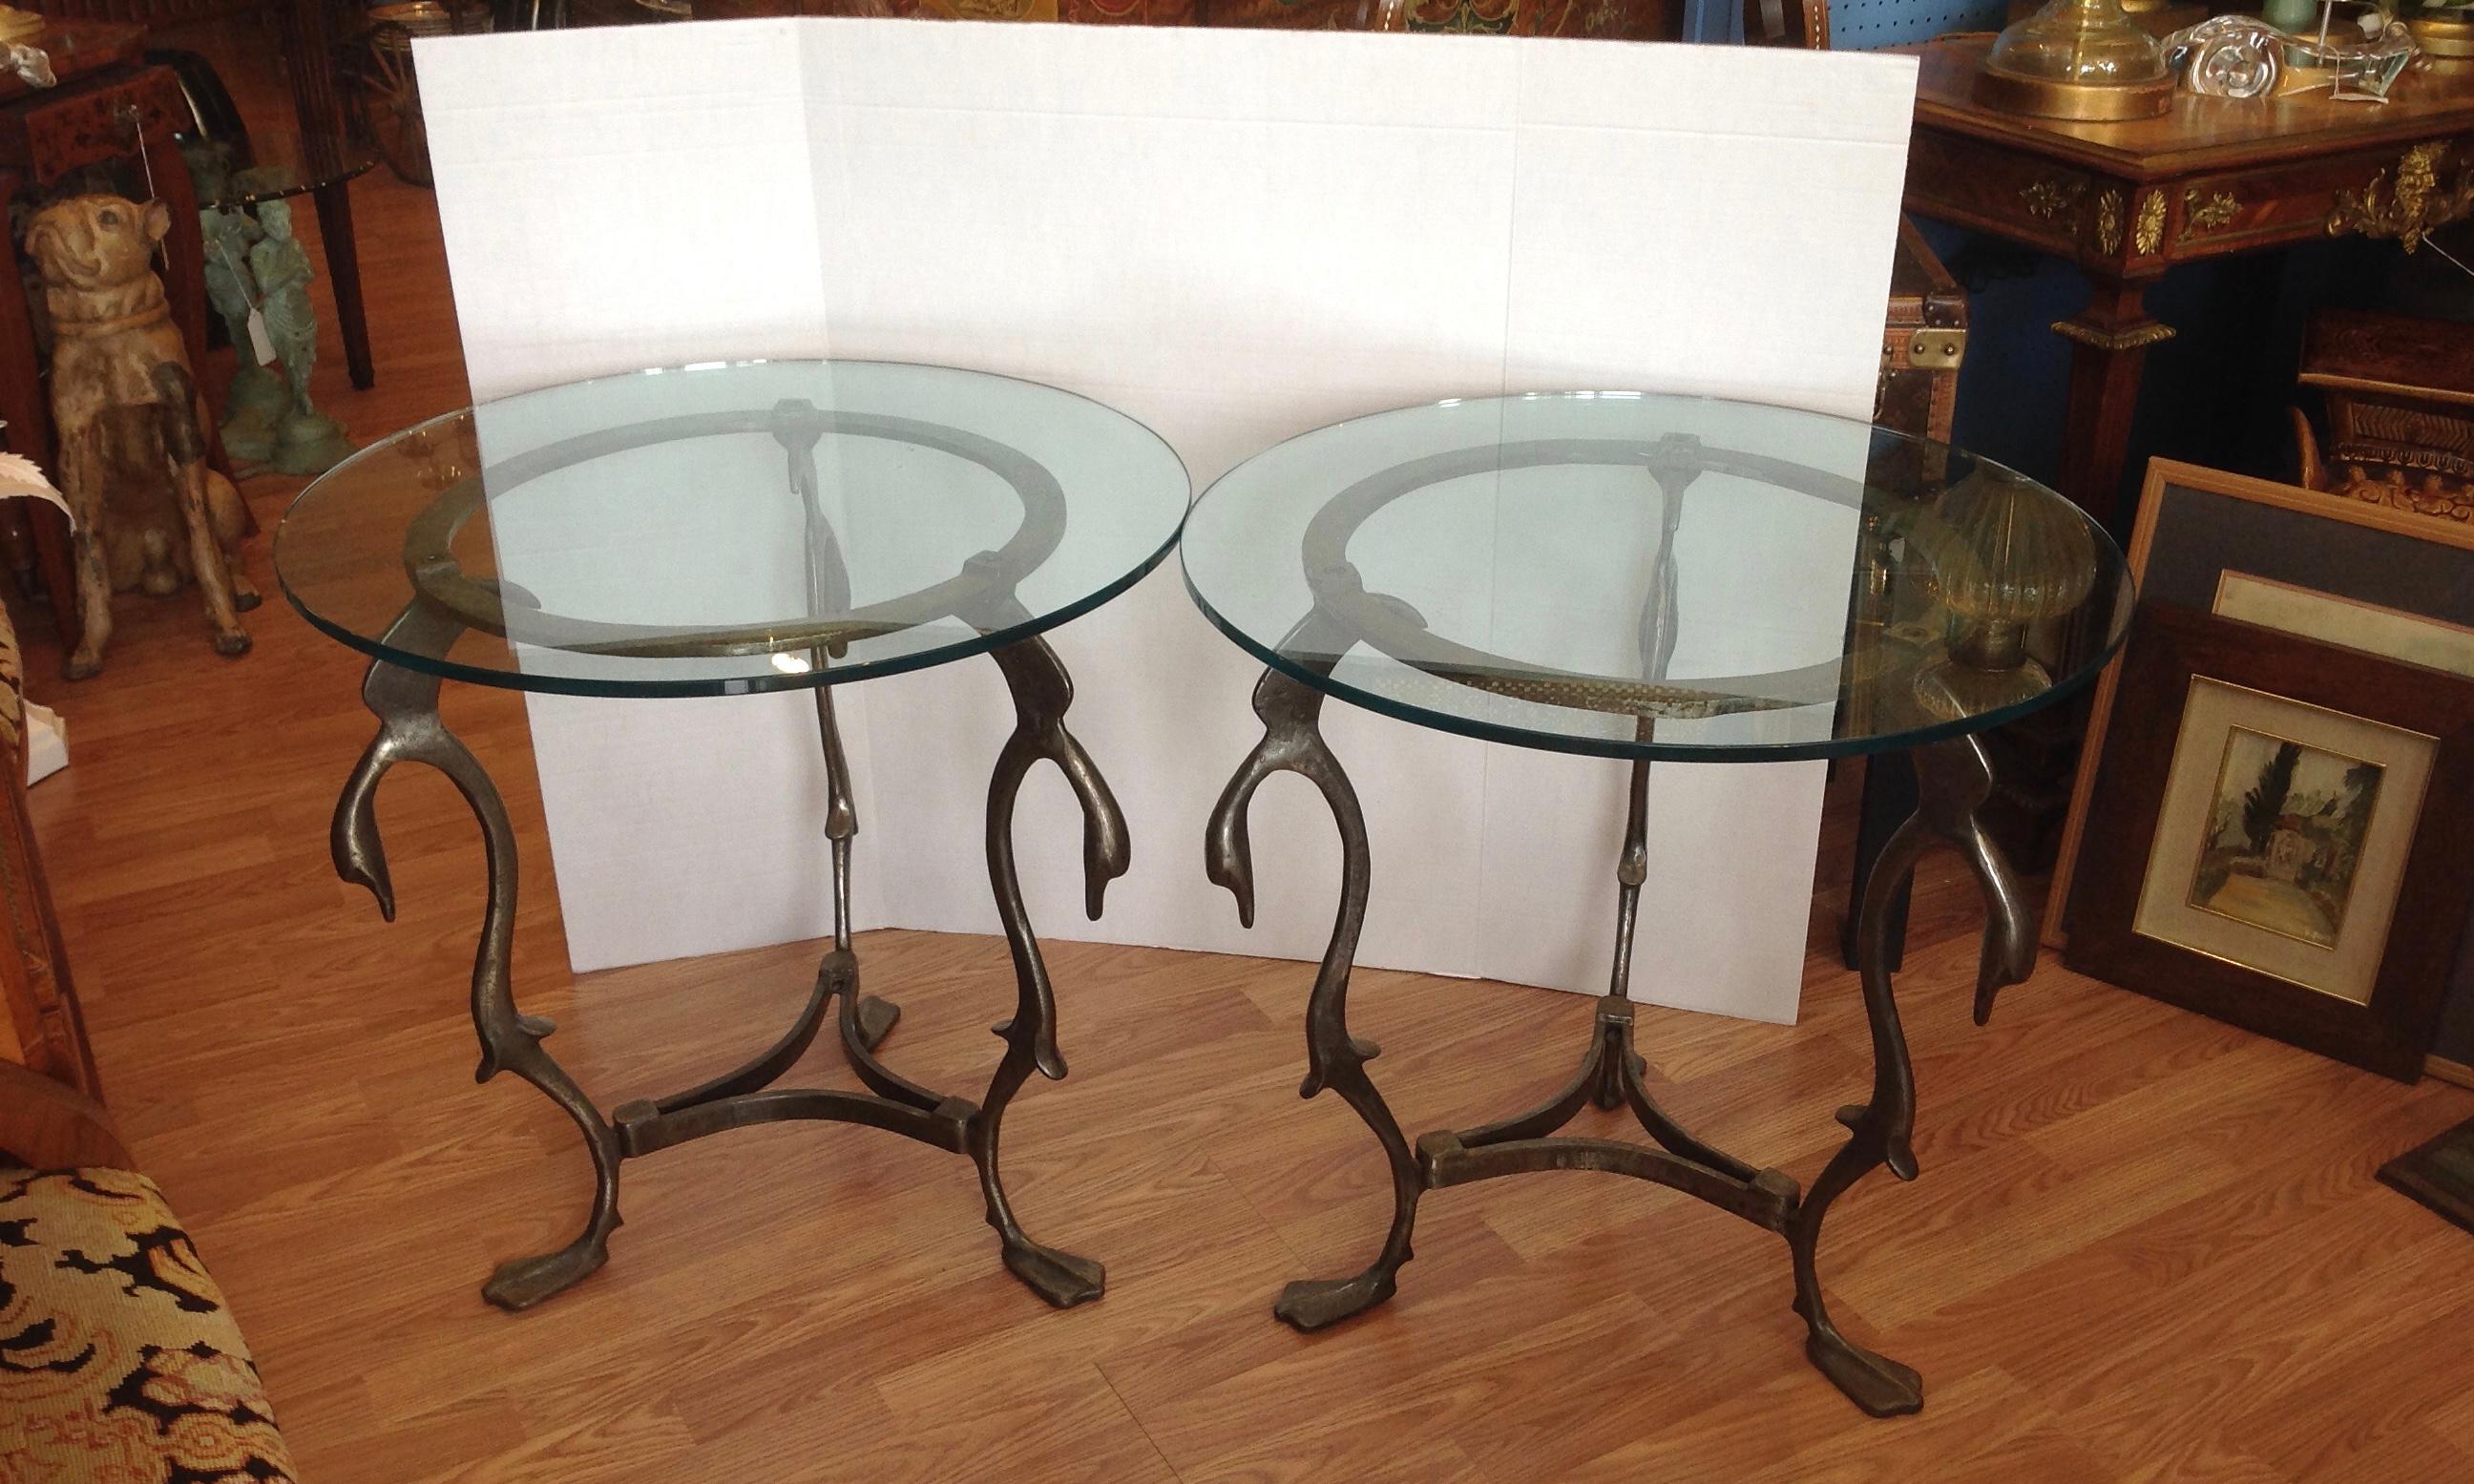 The tables are fashioned from steel and designed with 3 moderne swan form heads at the top;
and terminate in web feet at their bases.
The tables are mounted with glass tops.